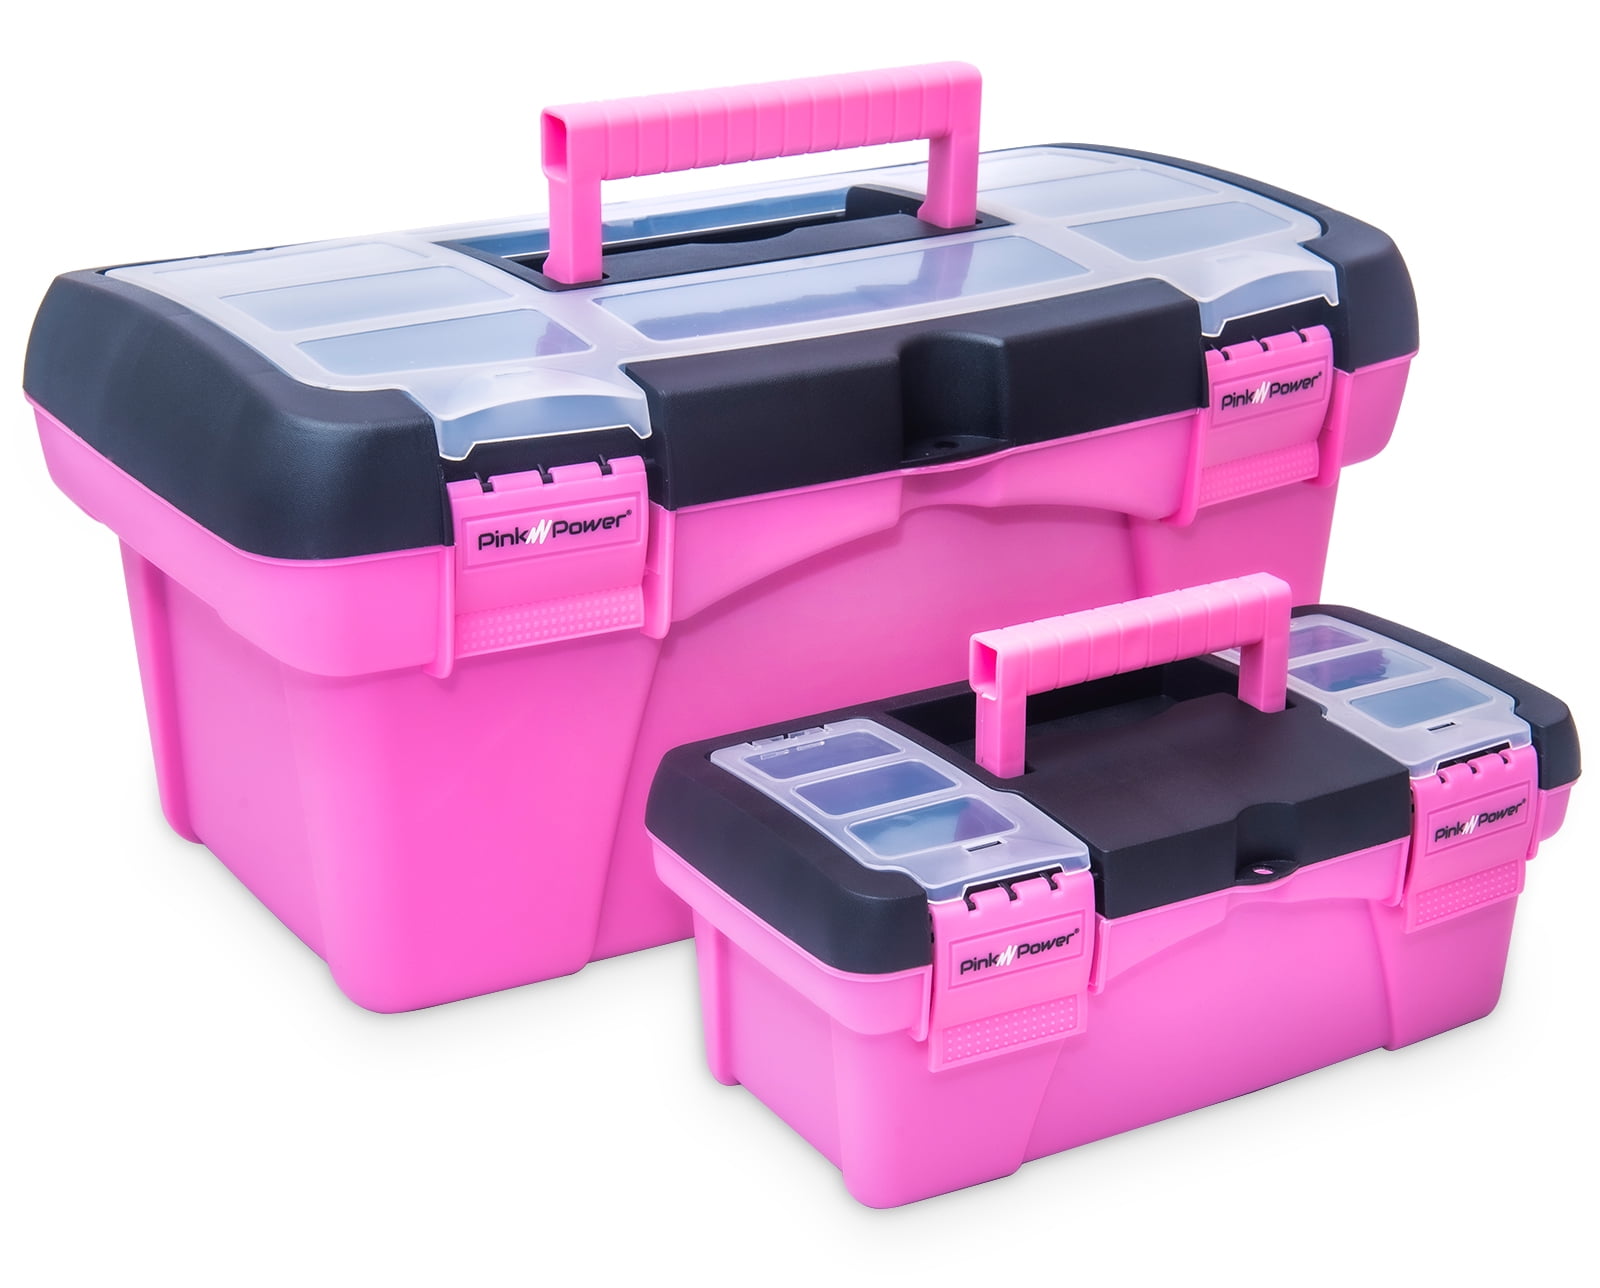 Pink Power 18” Aluminum/Plastic Tool Box w/ Extra Storage for